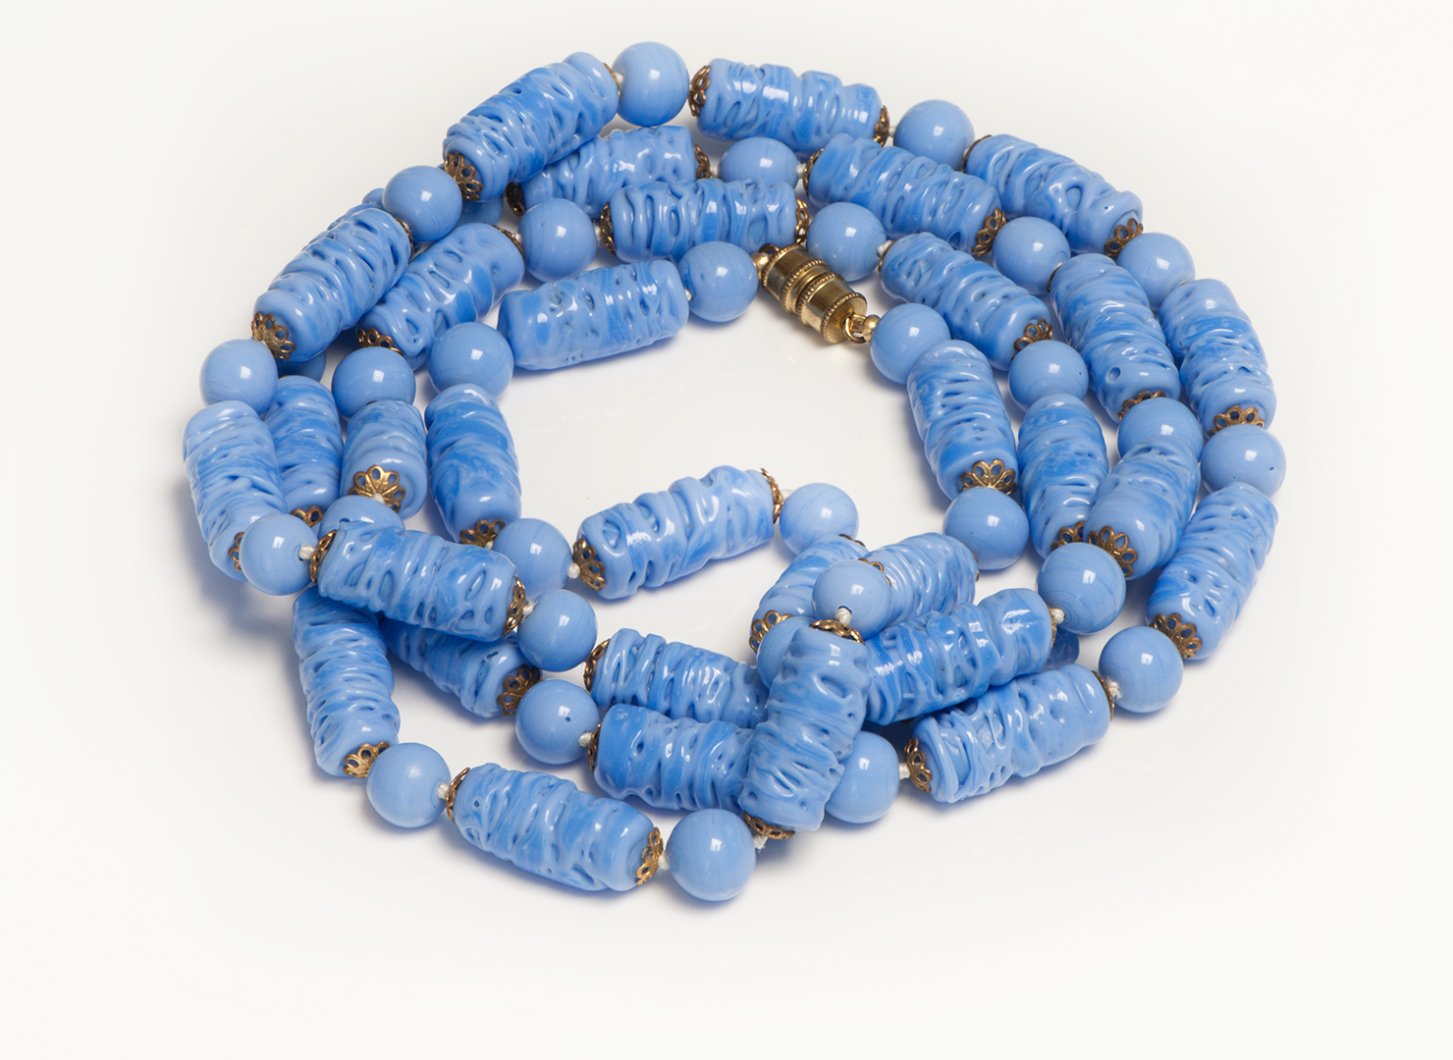 Vintage 1950's French Blue Poured Glass Beads Necklace